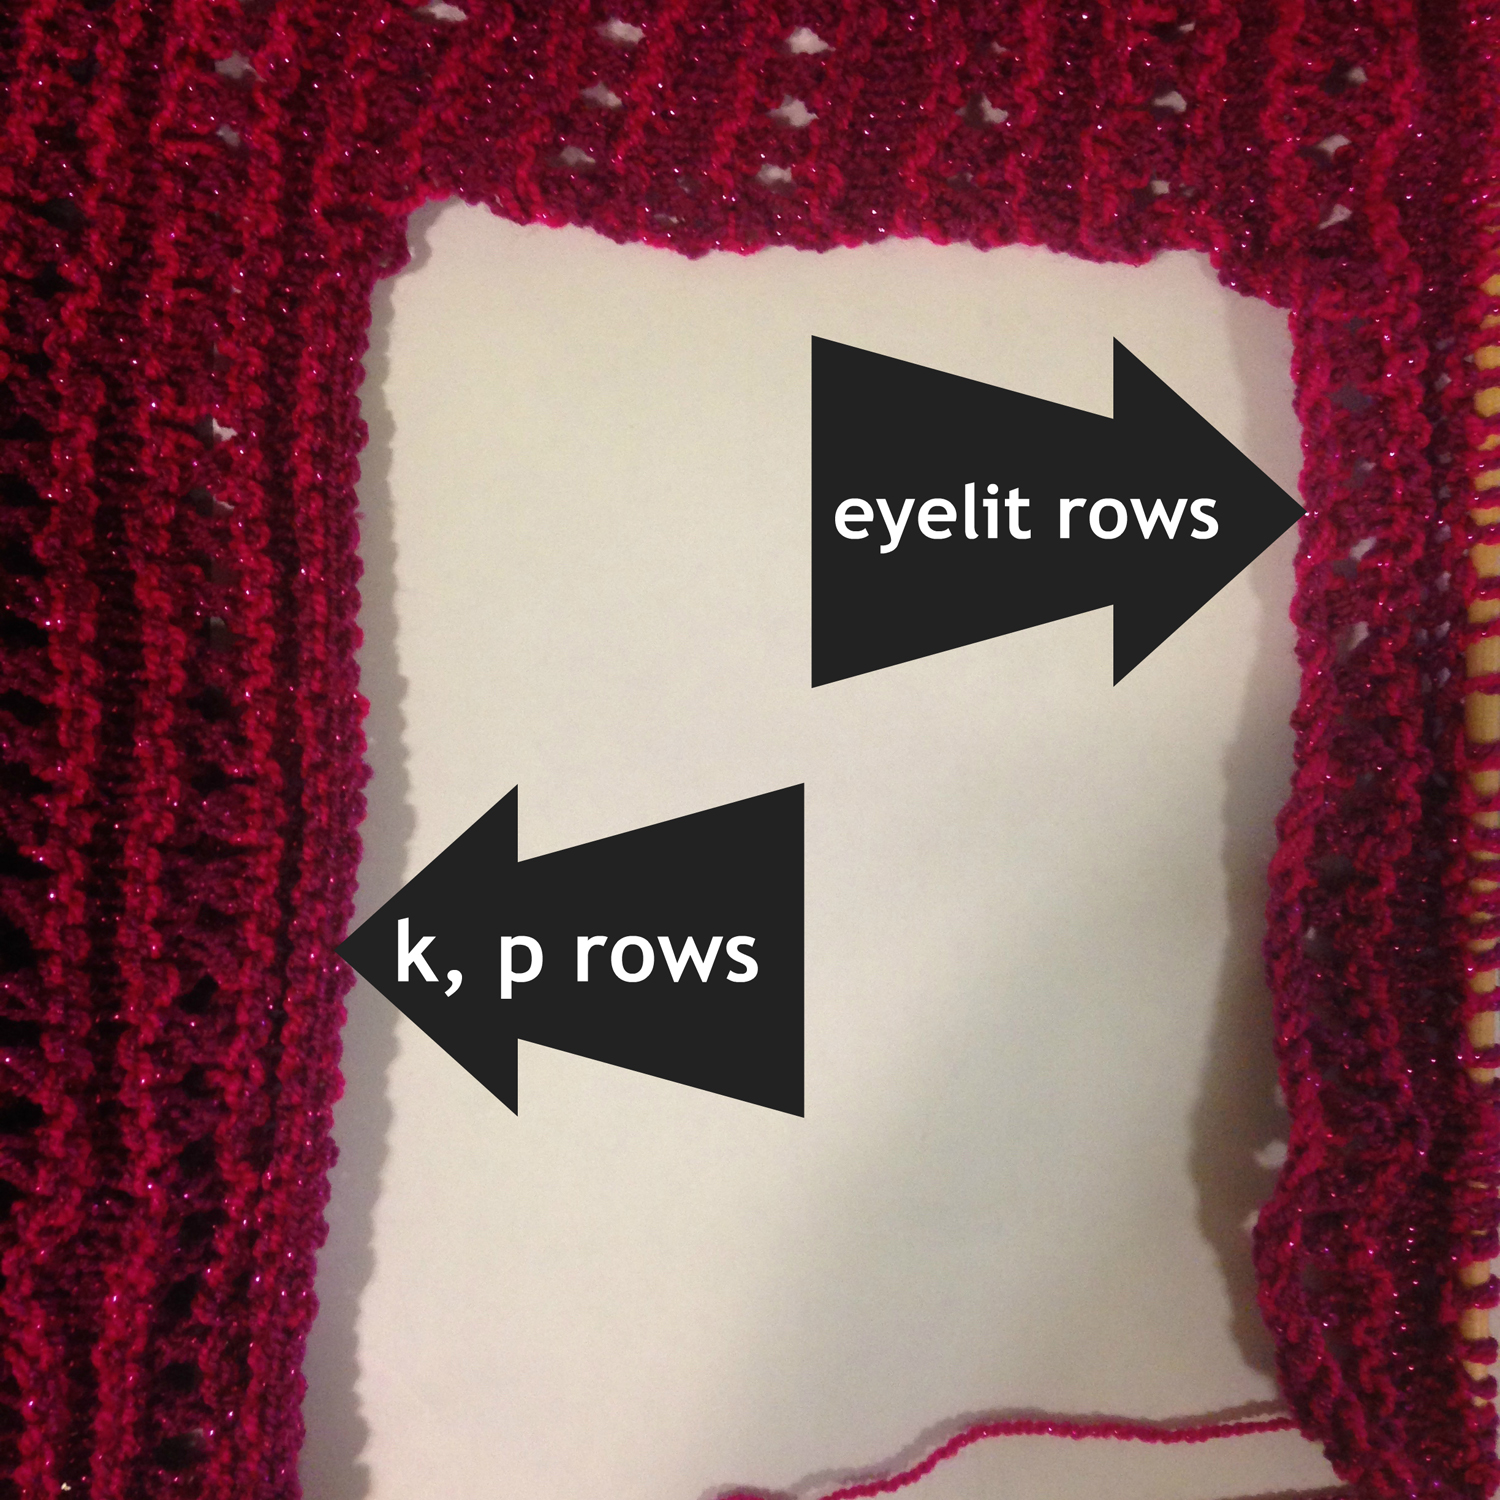 k p rows and eyelit rows